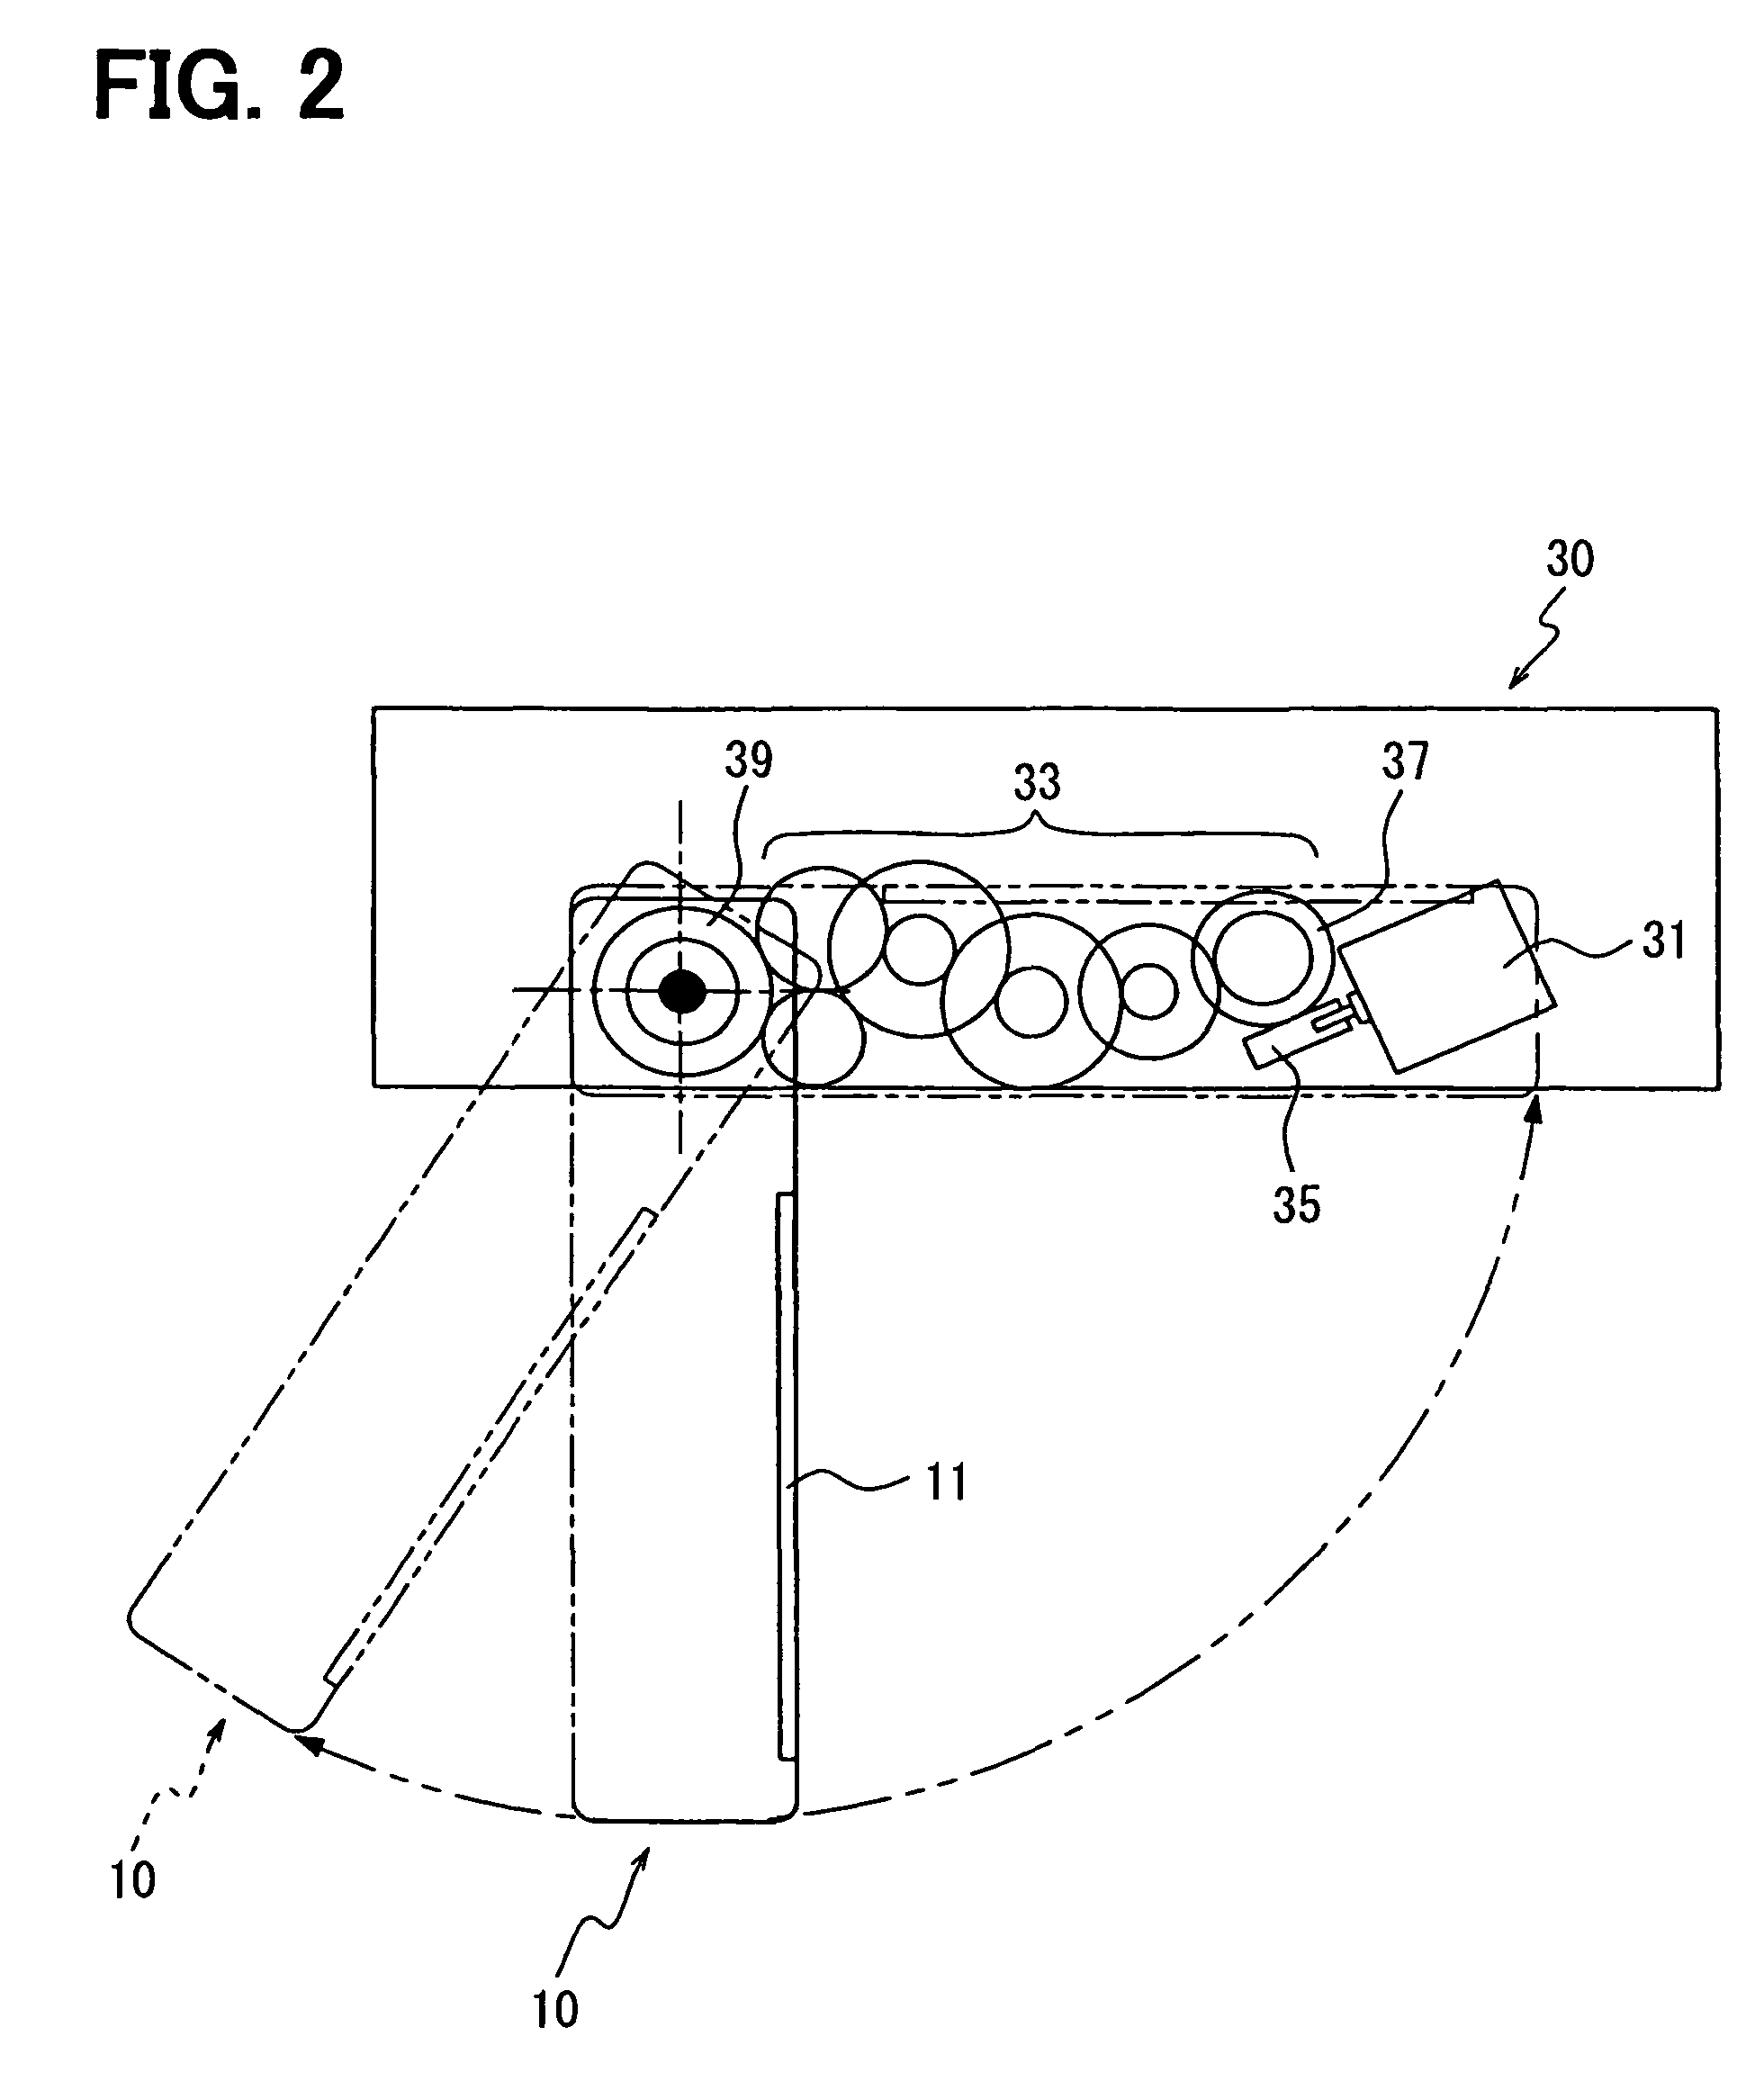 Display apparatus having mechanism for opening and closing display panel